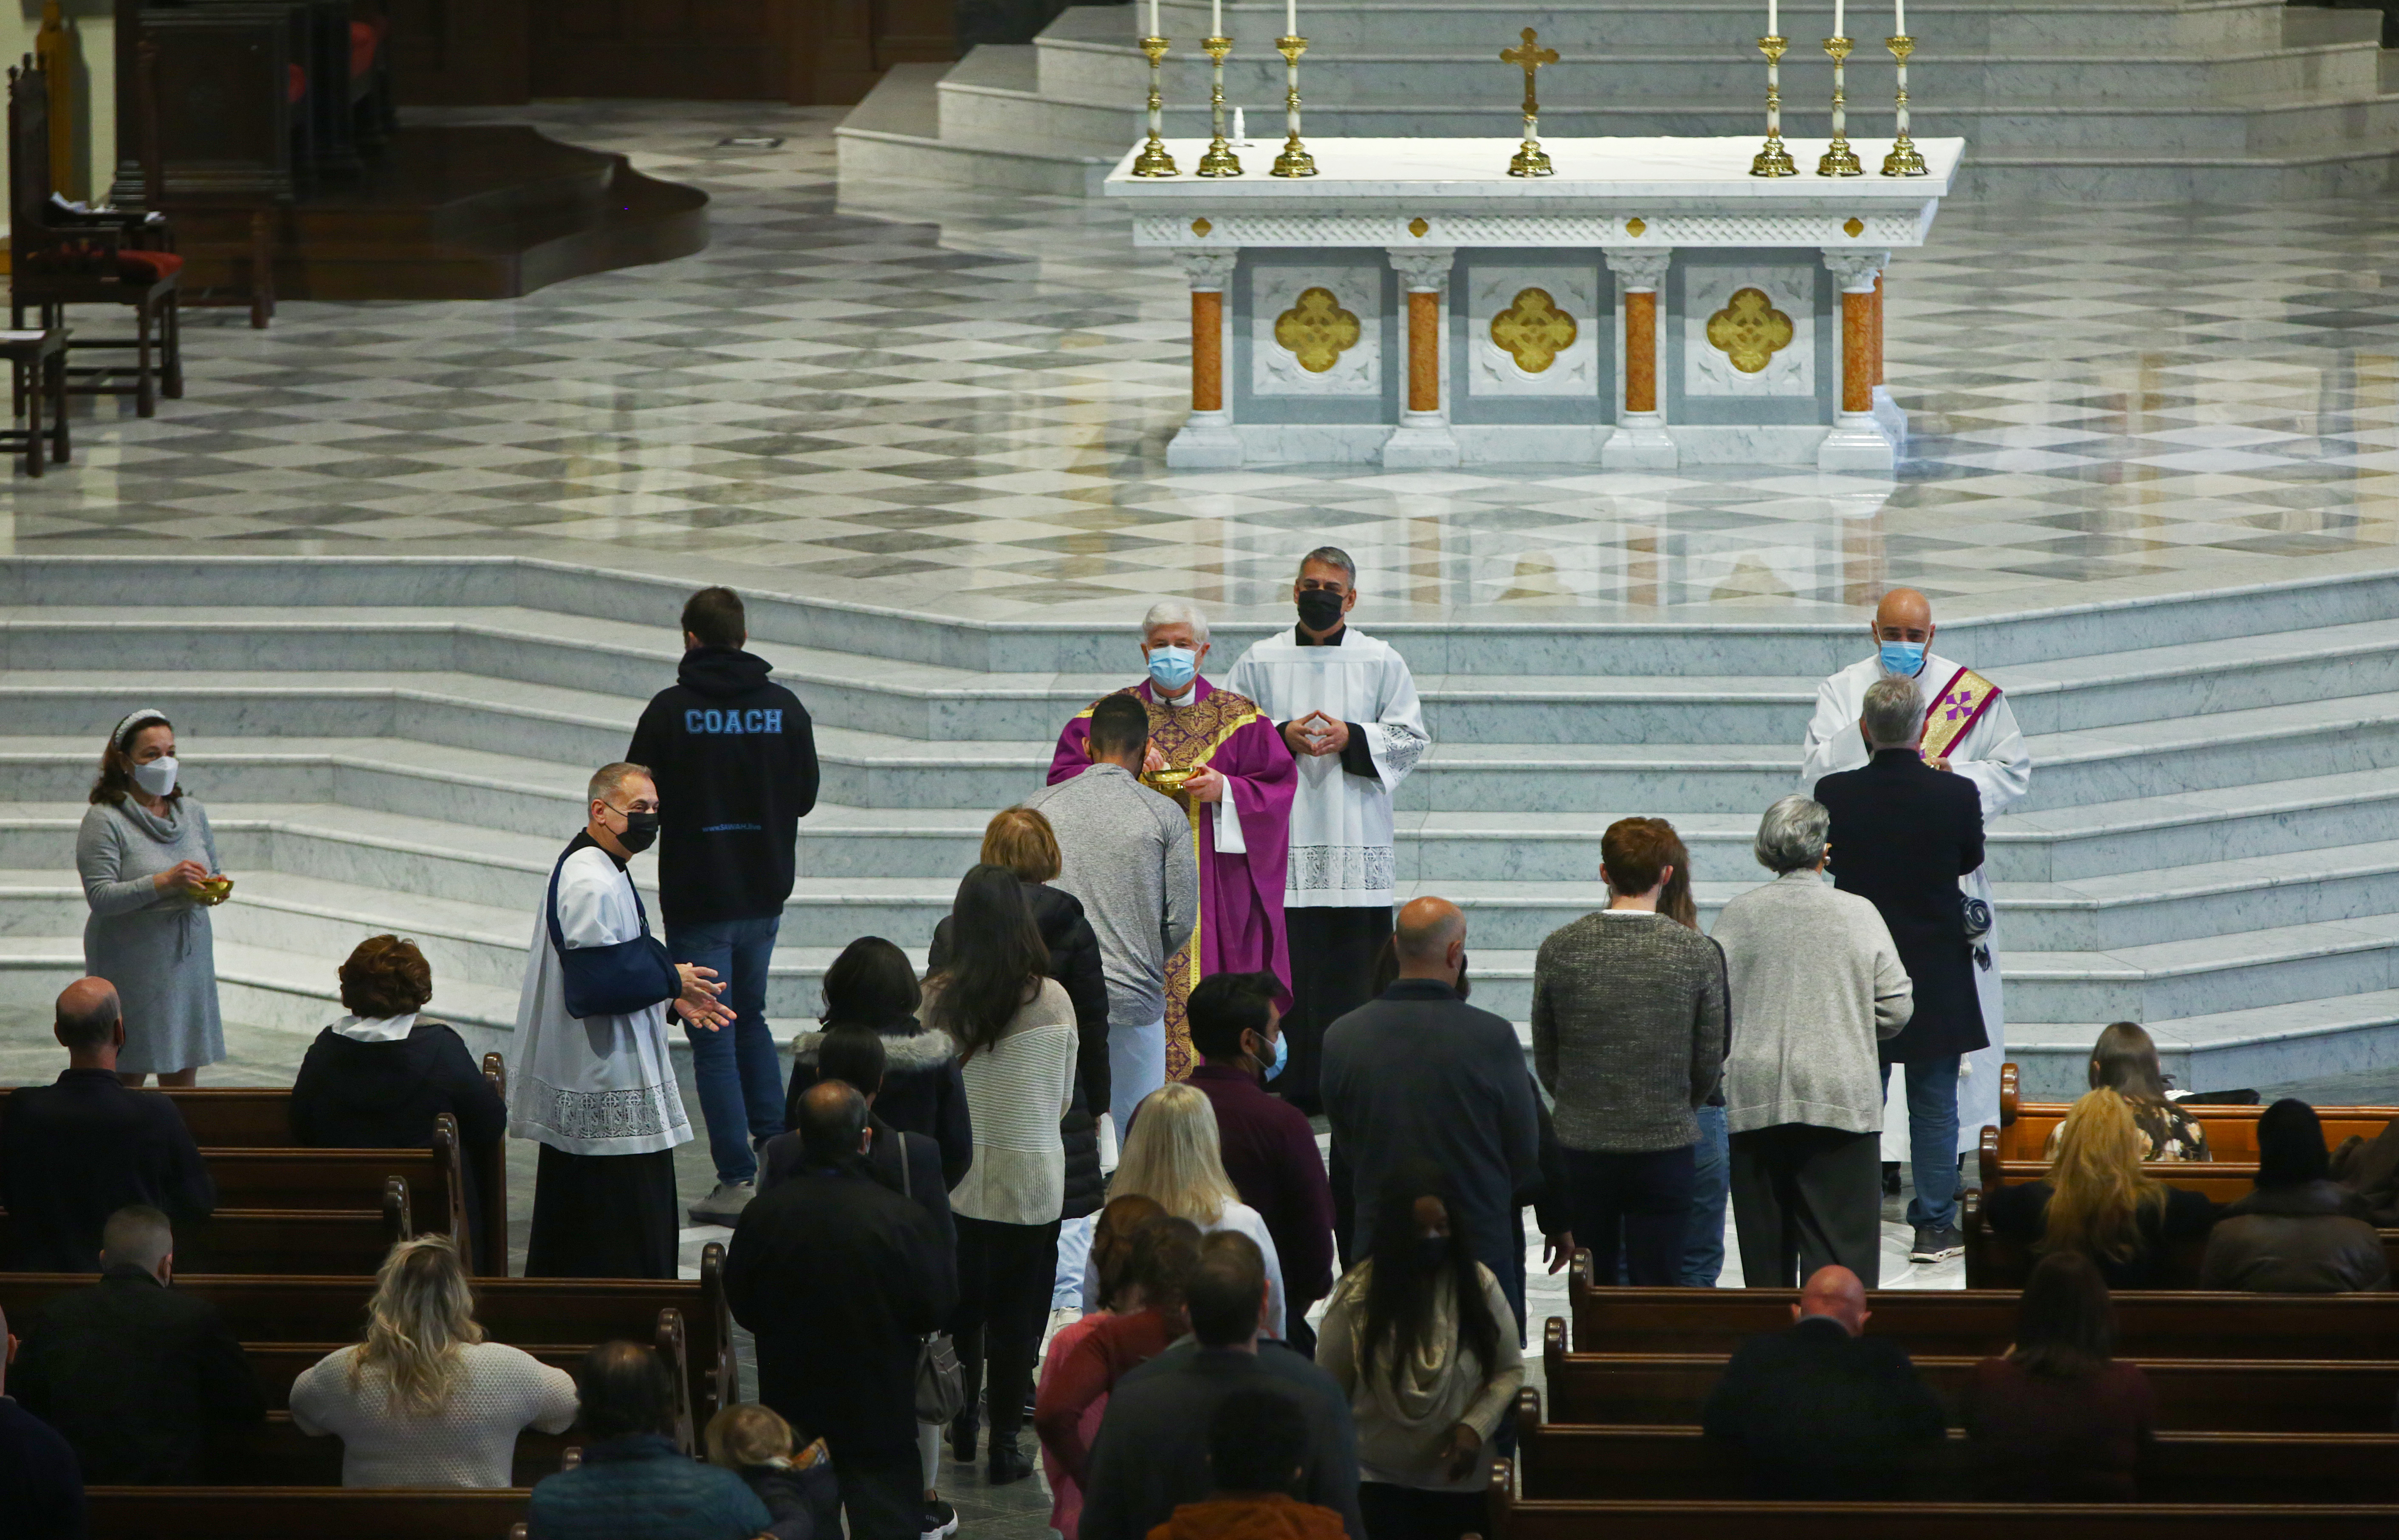 Monsignor Kevin O'Leary (purple clothes) celebrated Holy Communion.